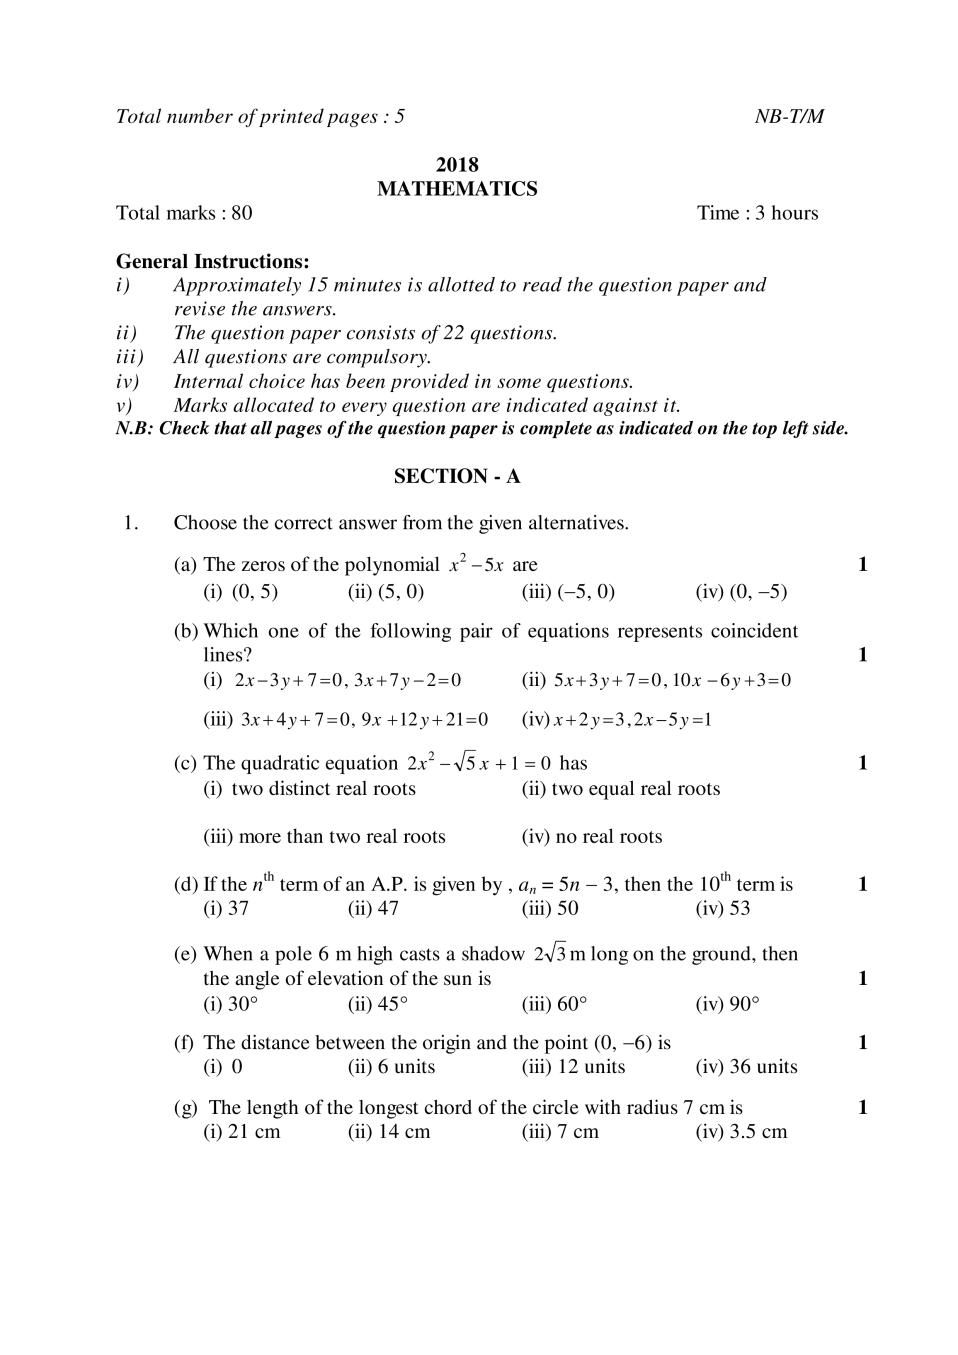 NBSE Class 10 Question Paper 2018 for Maths - Page 1